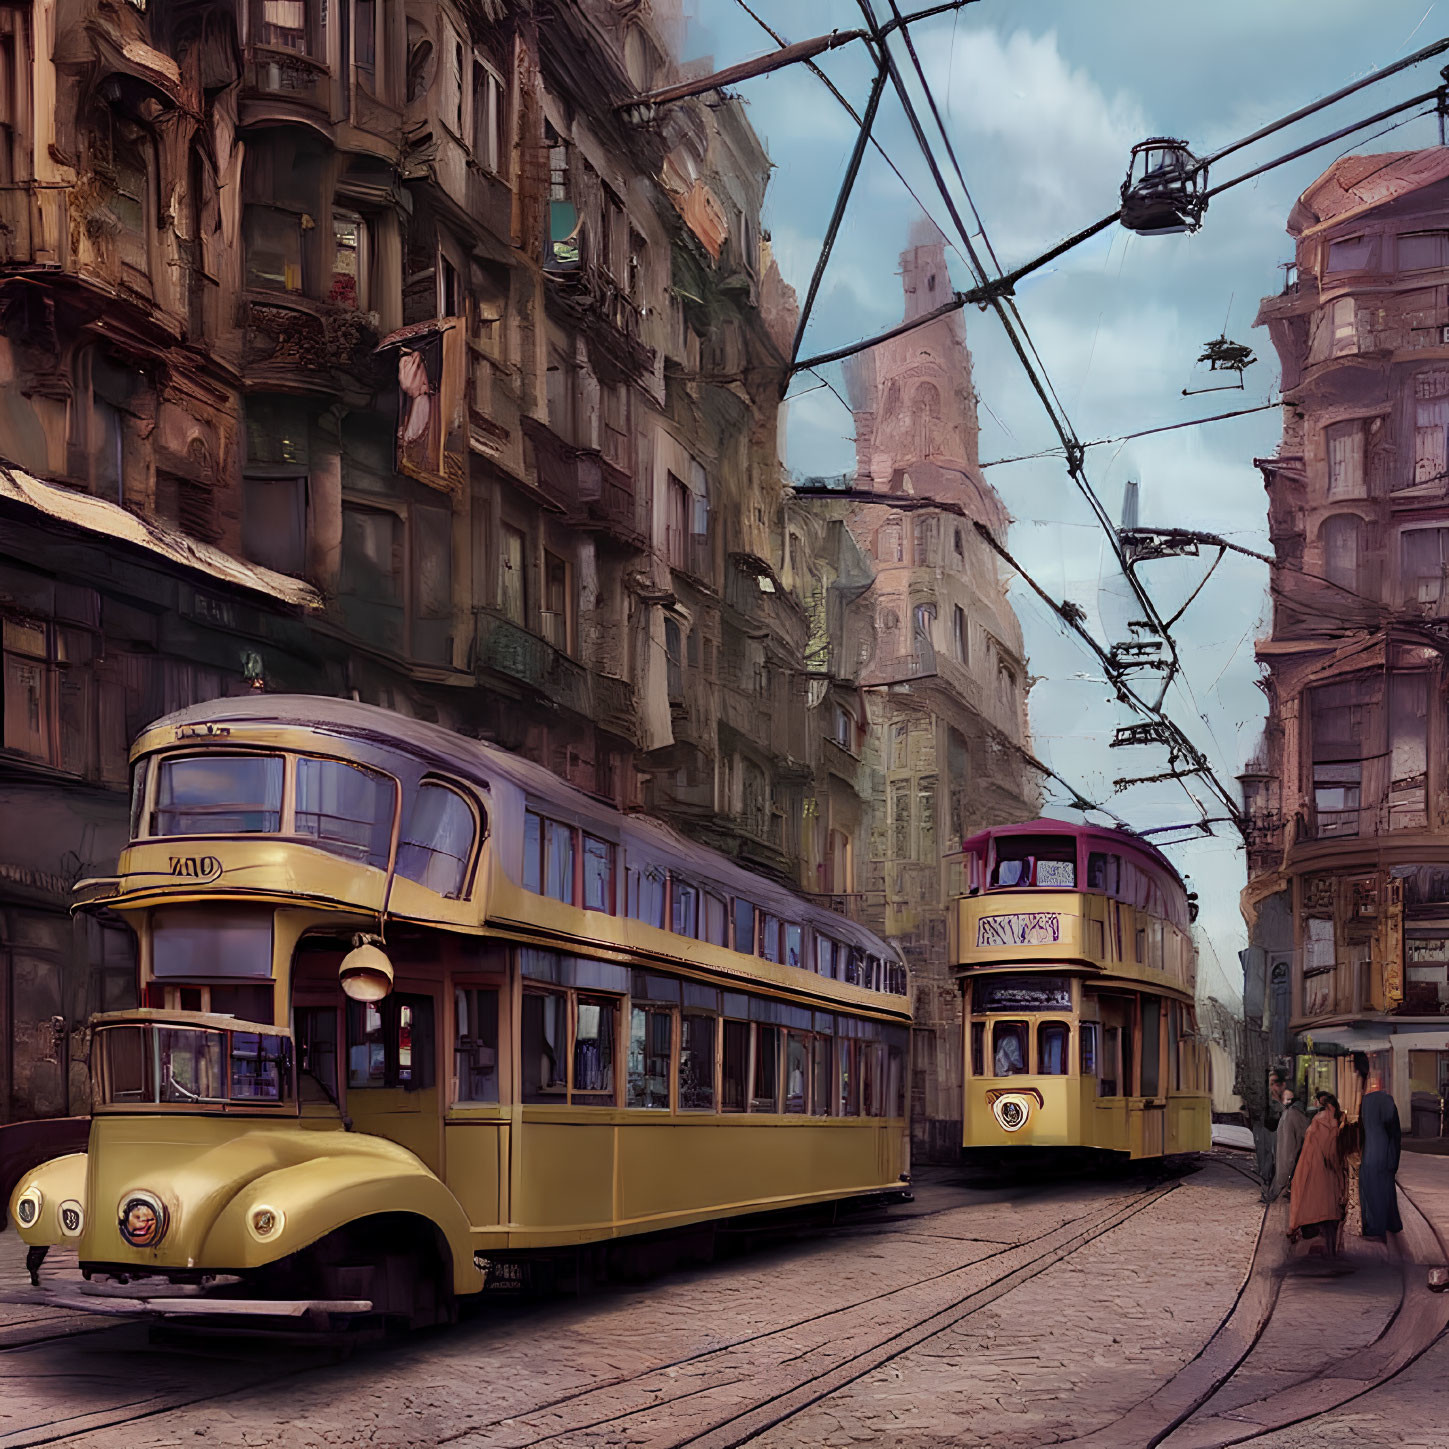 Vintage trams, old buildings, laundry, pedestrians in nostalgic cityscape